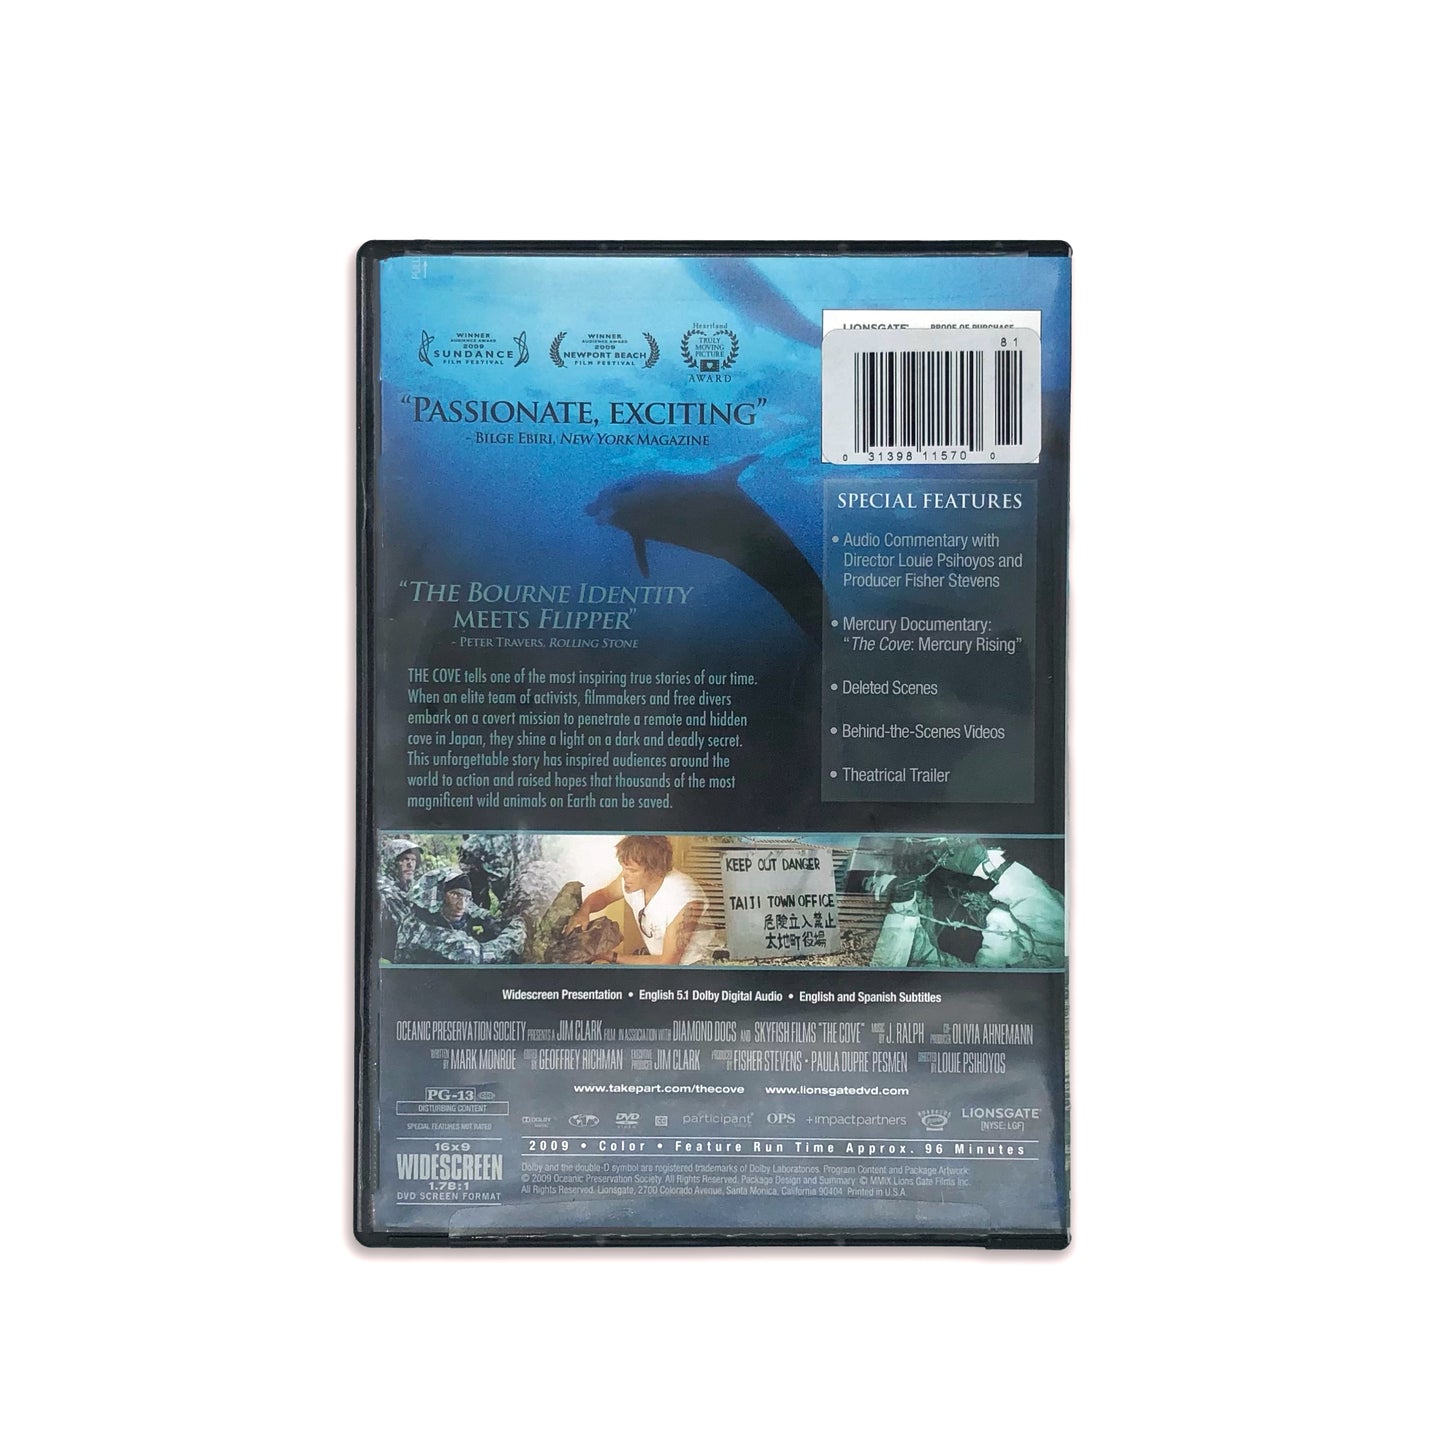 The Cove: Man is Their Biggest Threat and Their Only Hope - DVD